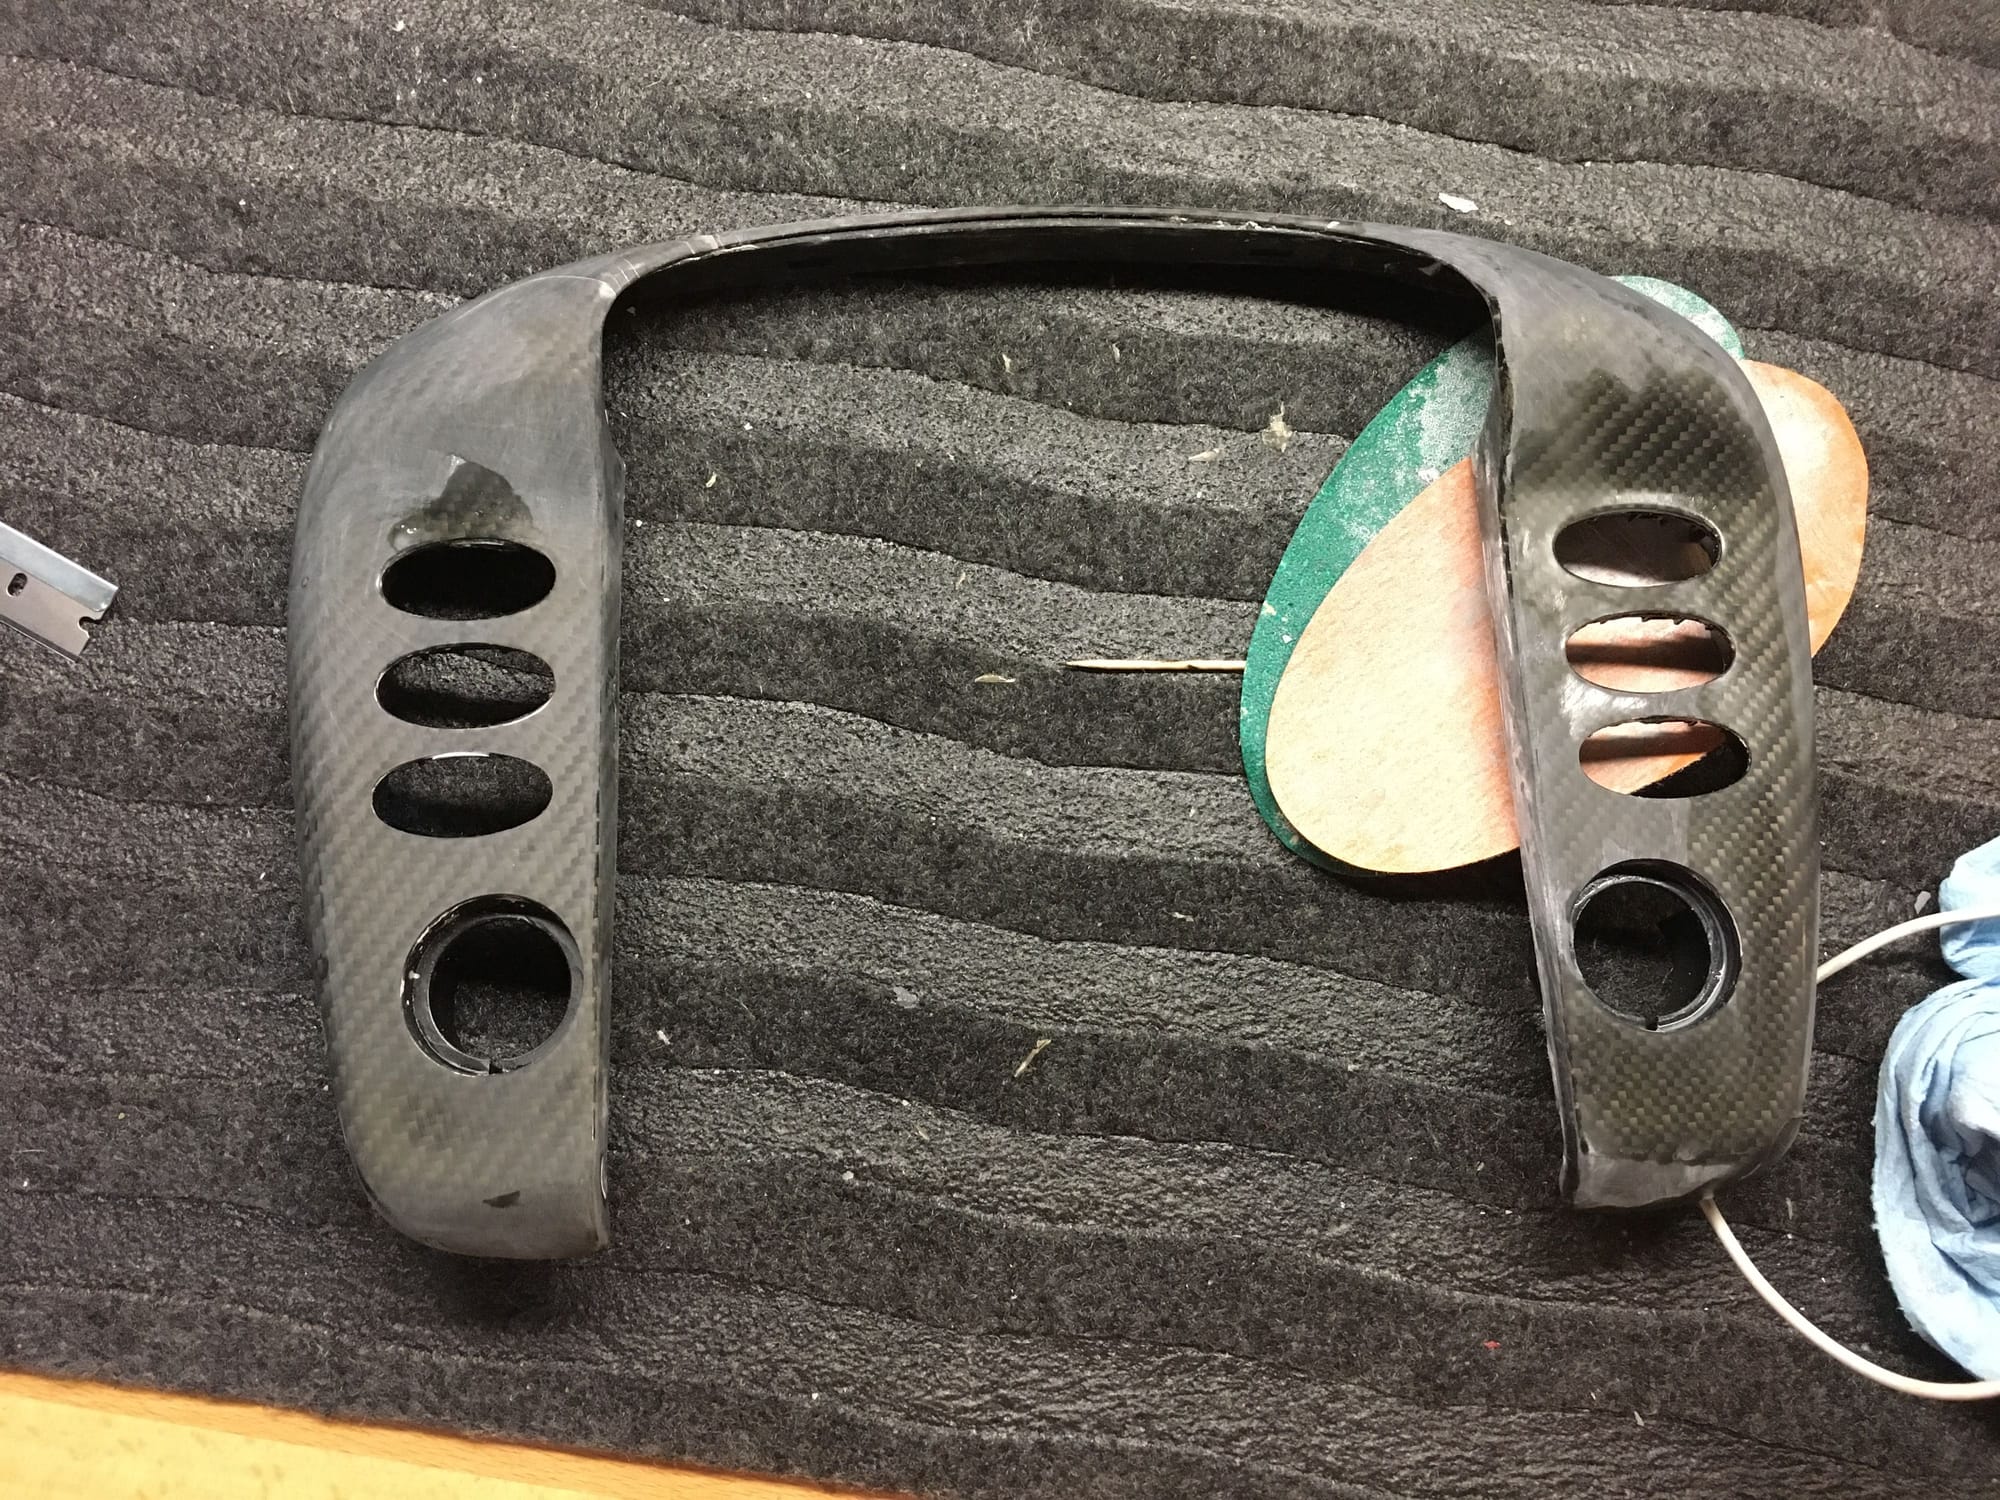 Repair Carbon Fiber Parts To Mirror Finish (With Epoxy Coating Resin) 